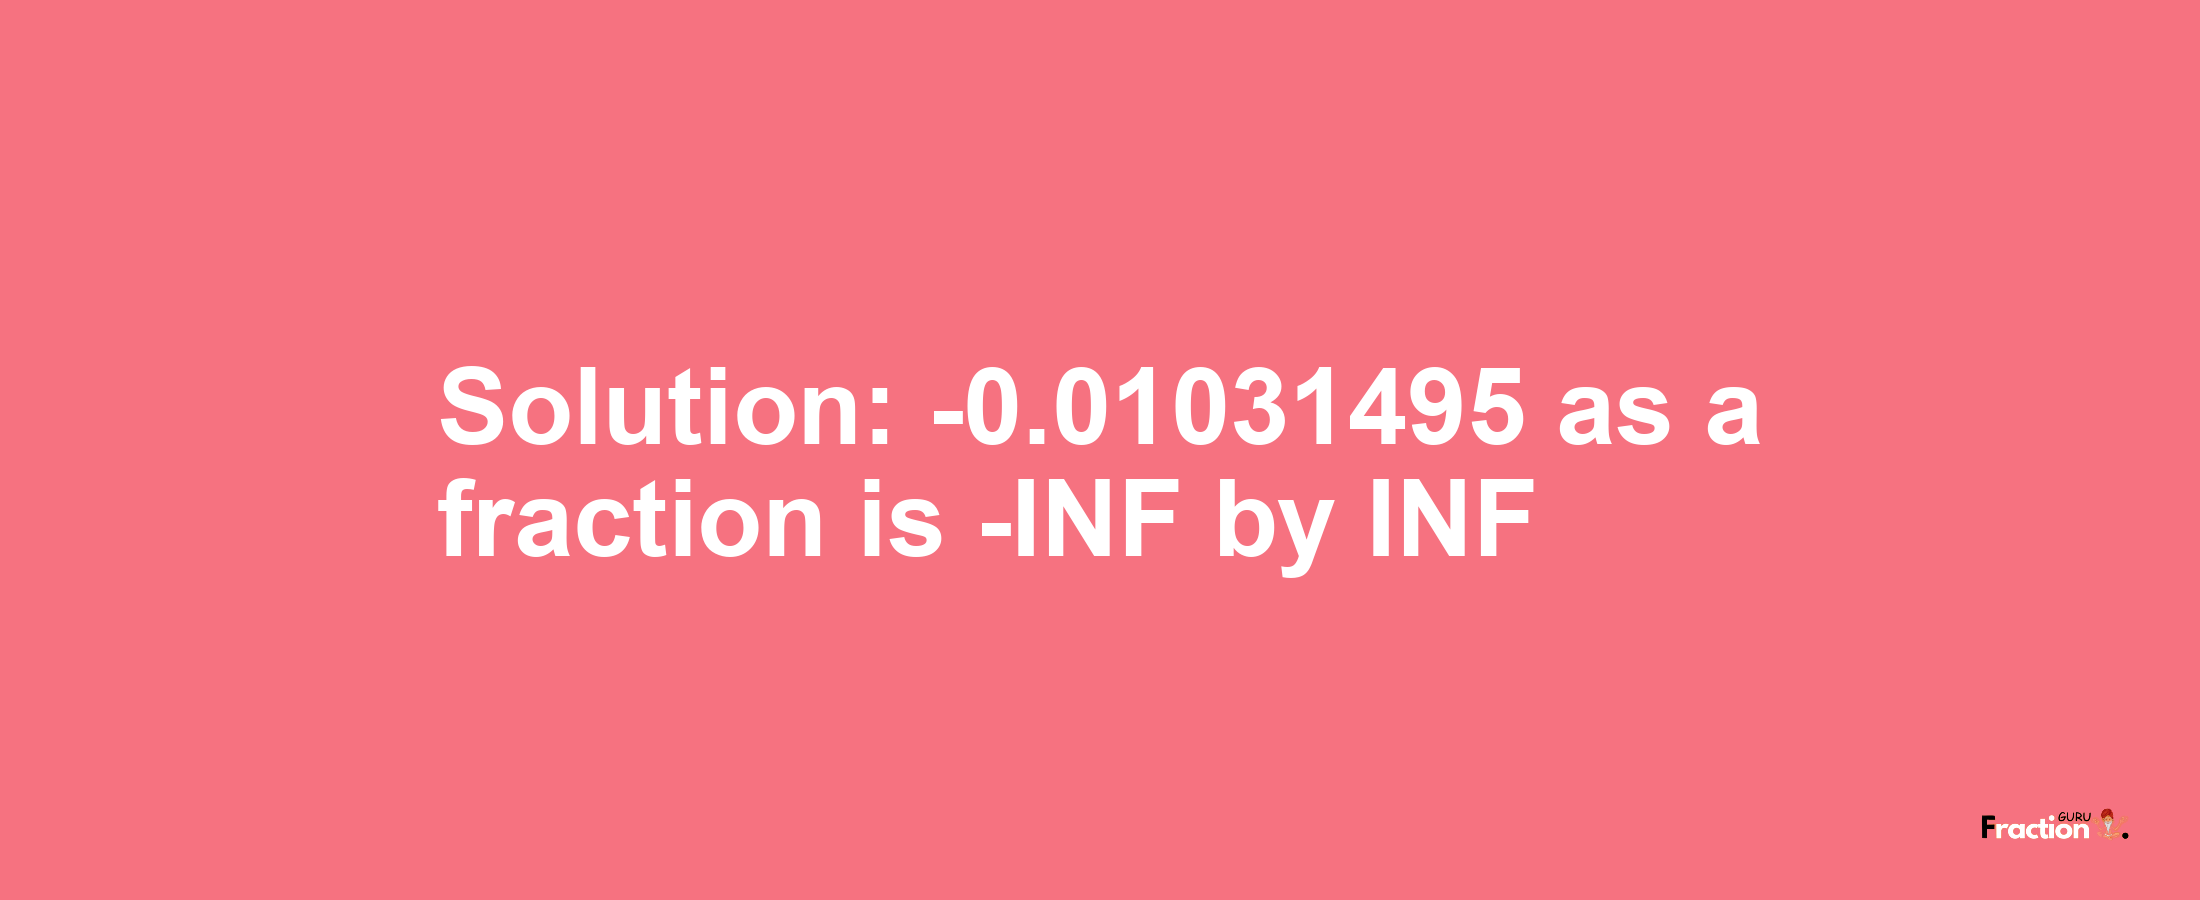 Solution:-0.01031495 as a fraction is -INF/INF